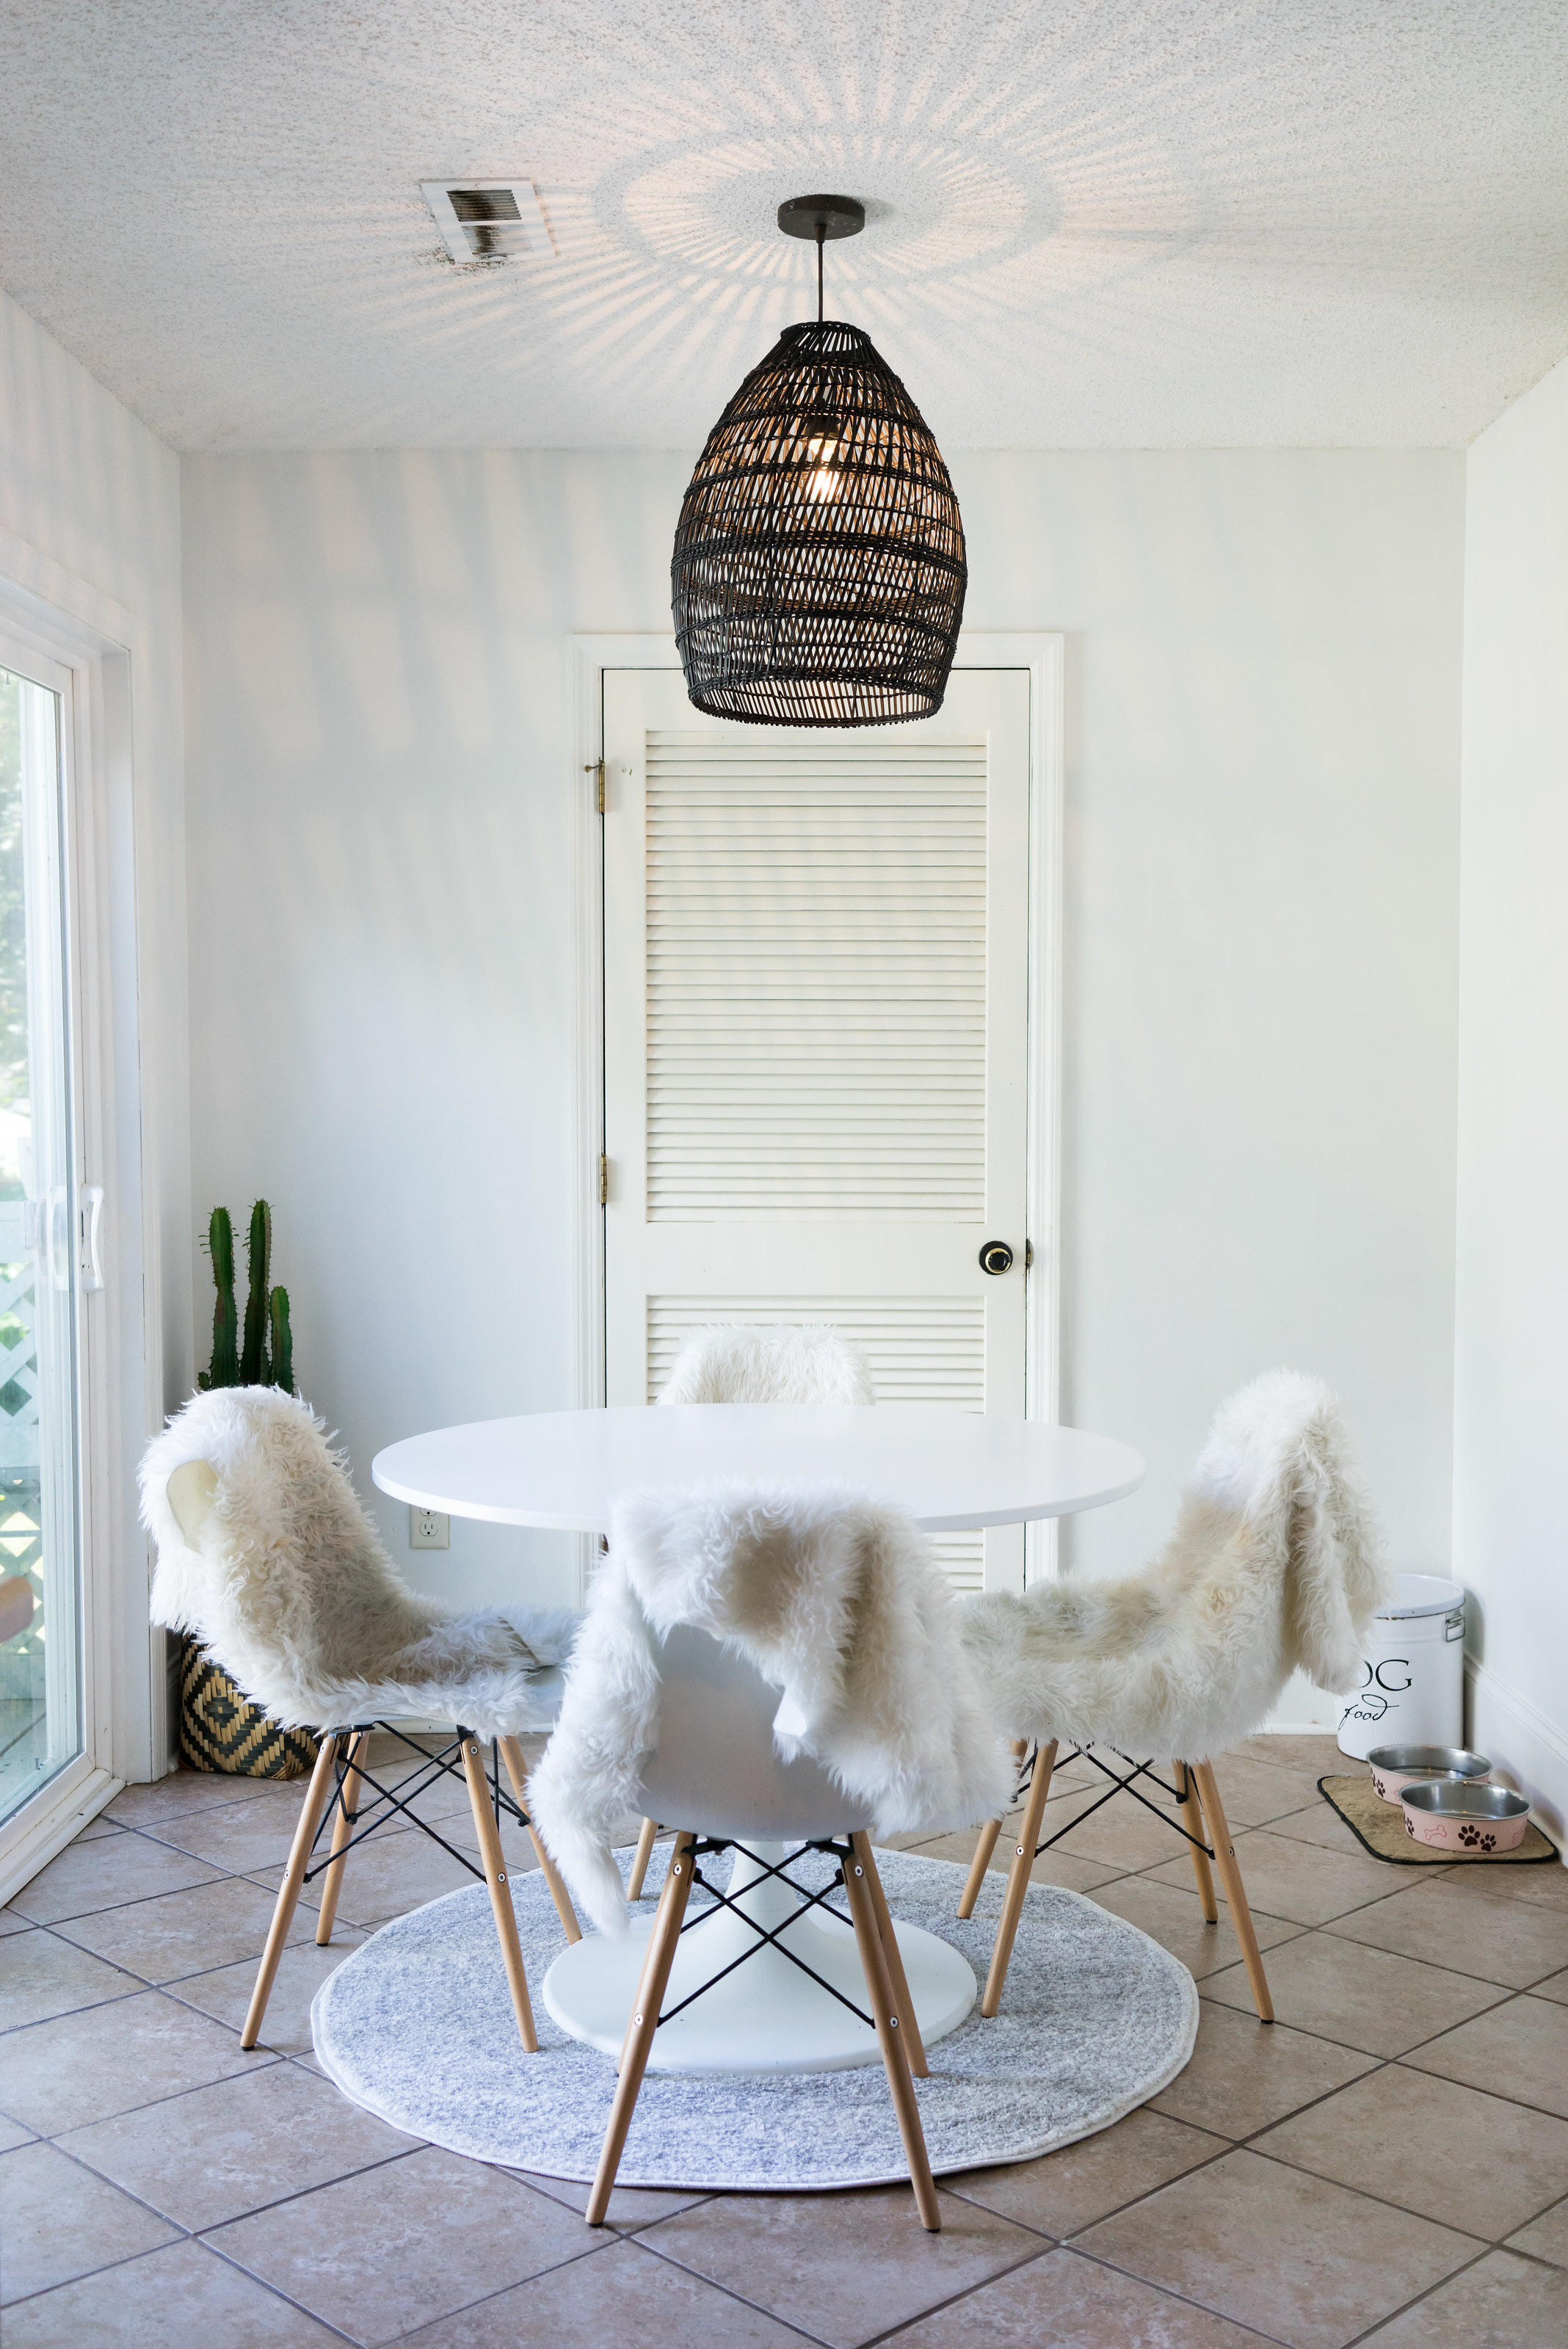 House Tour: A modern midcentury dining area